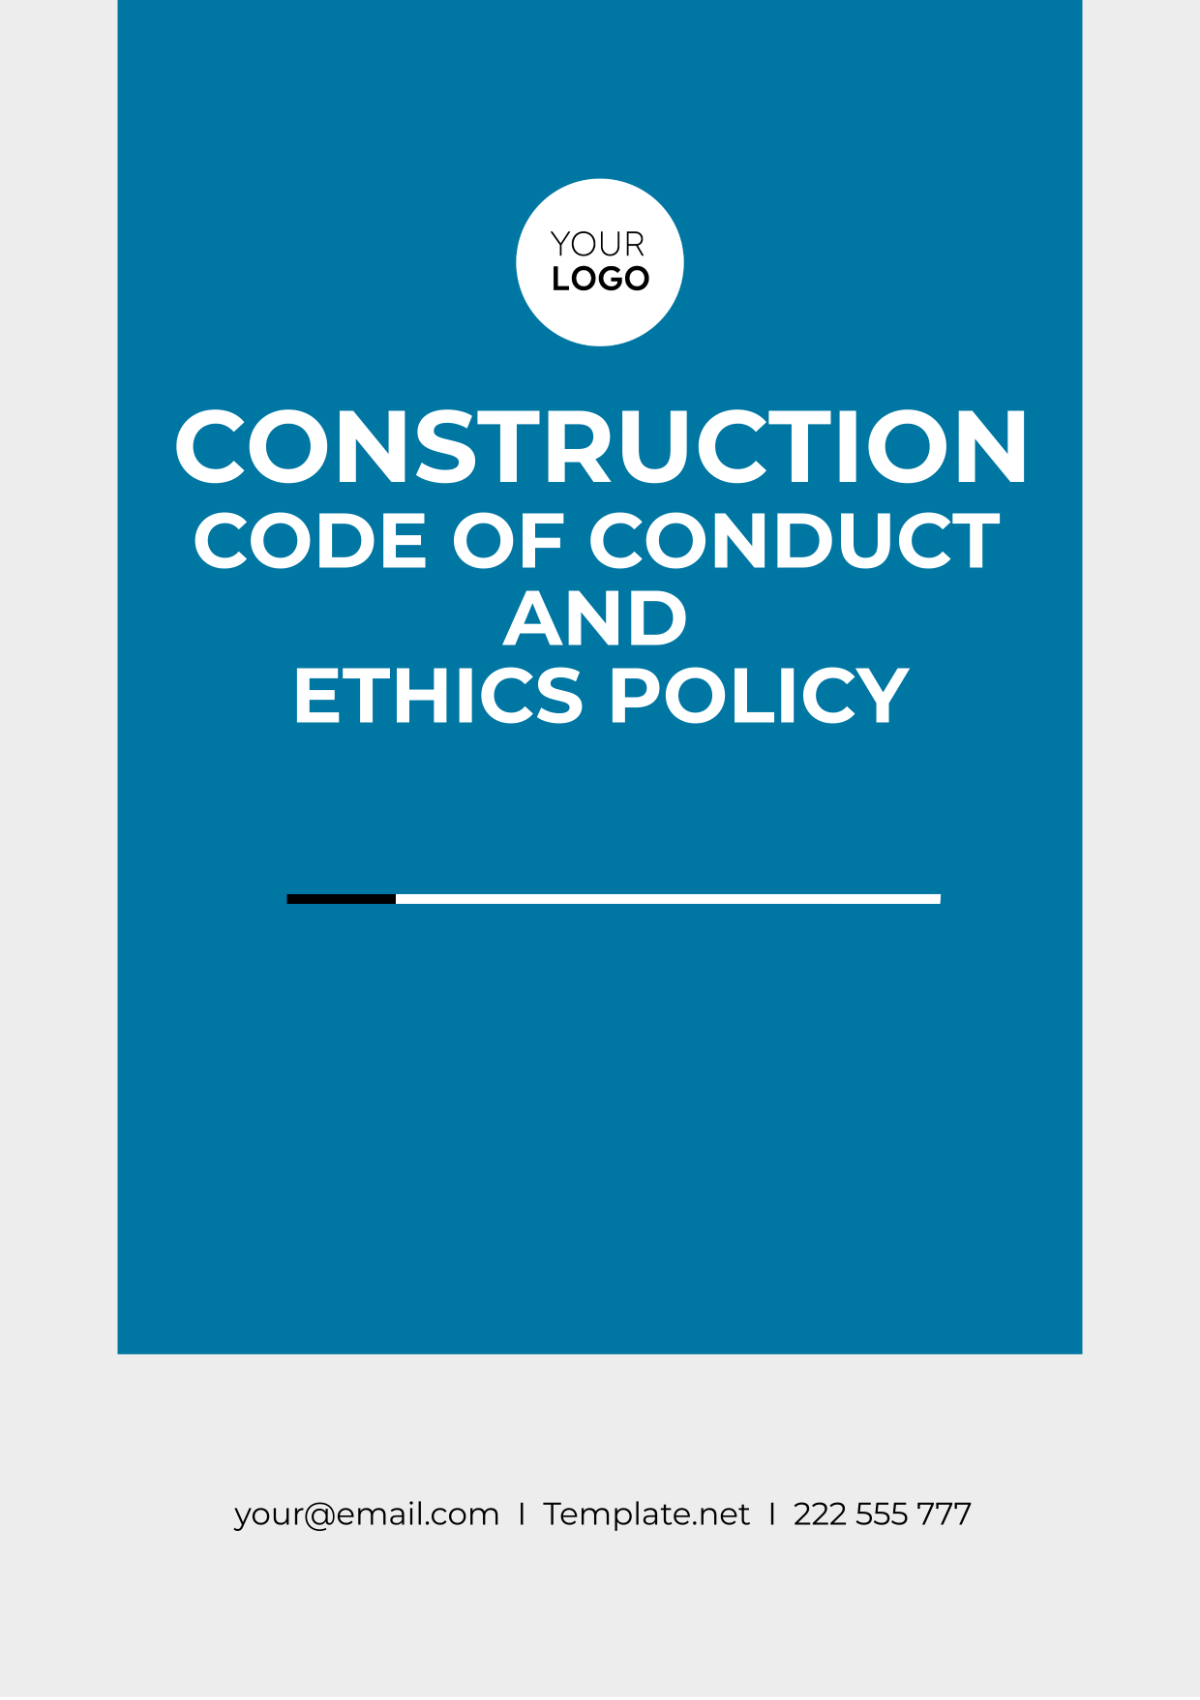 Free Construction Code of Conduct and Ethics Policy Template